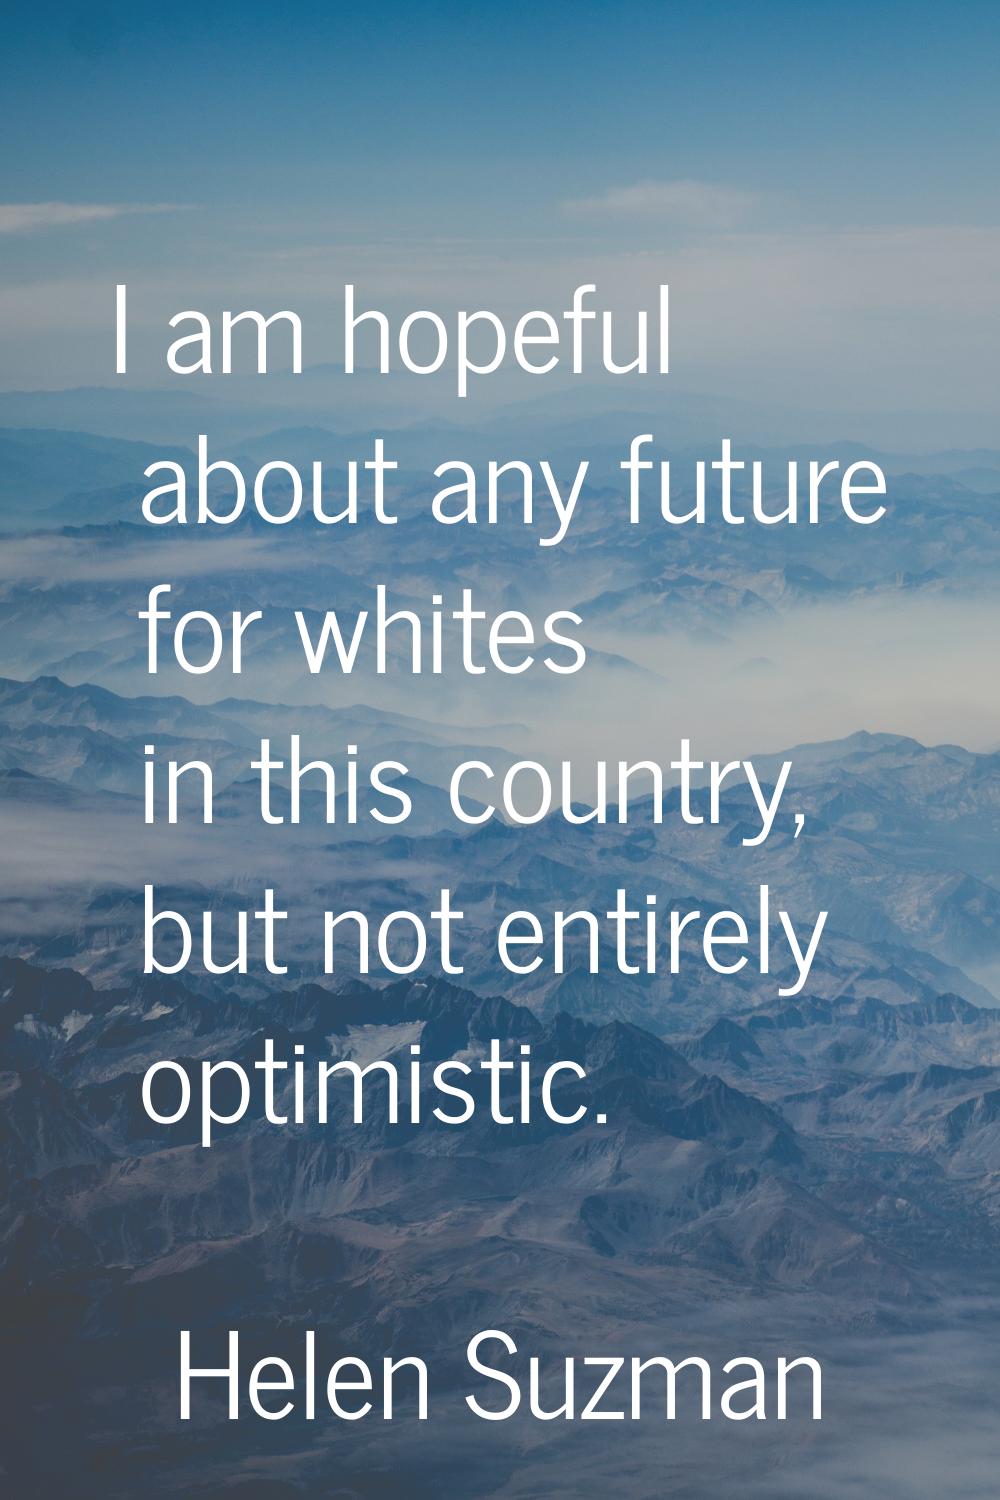 I am hopeful about any future for whites in this country, but not entirely optimistic.